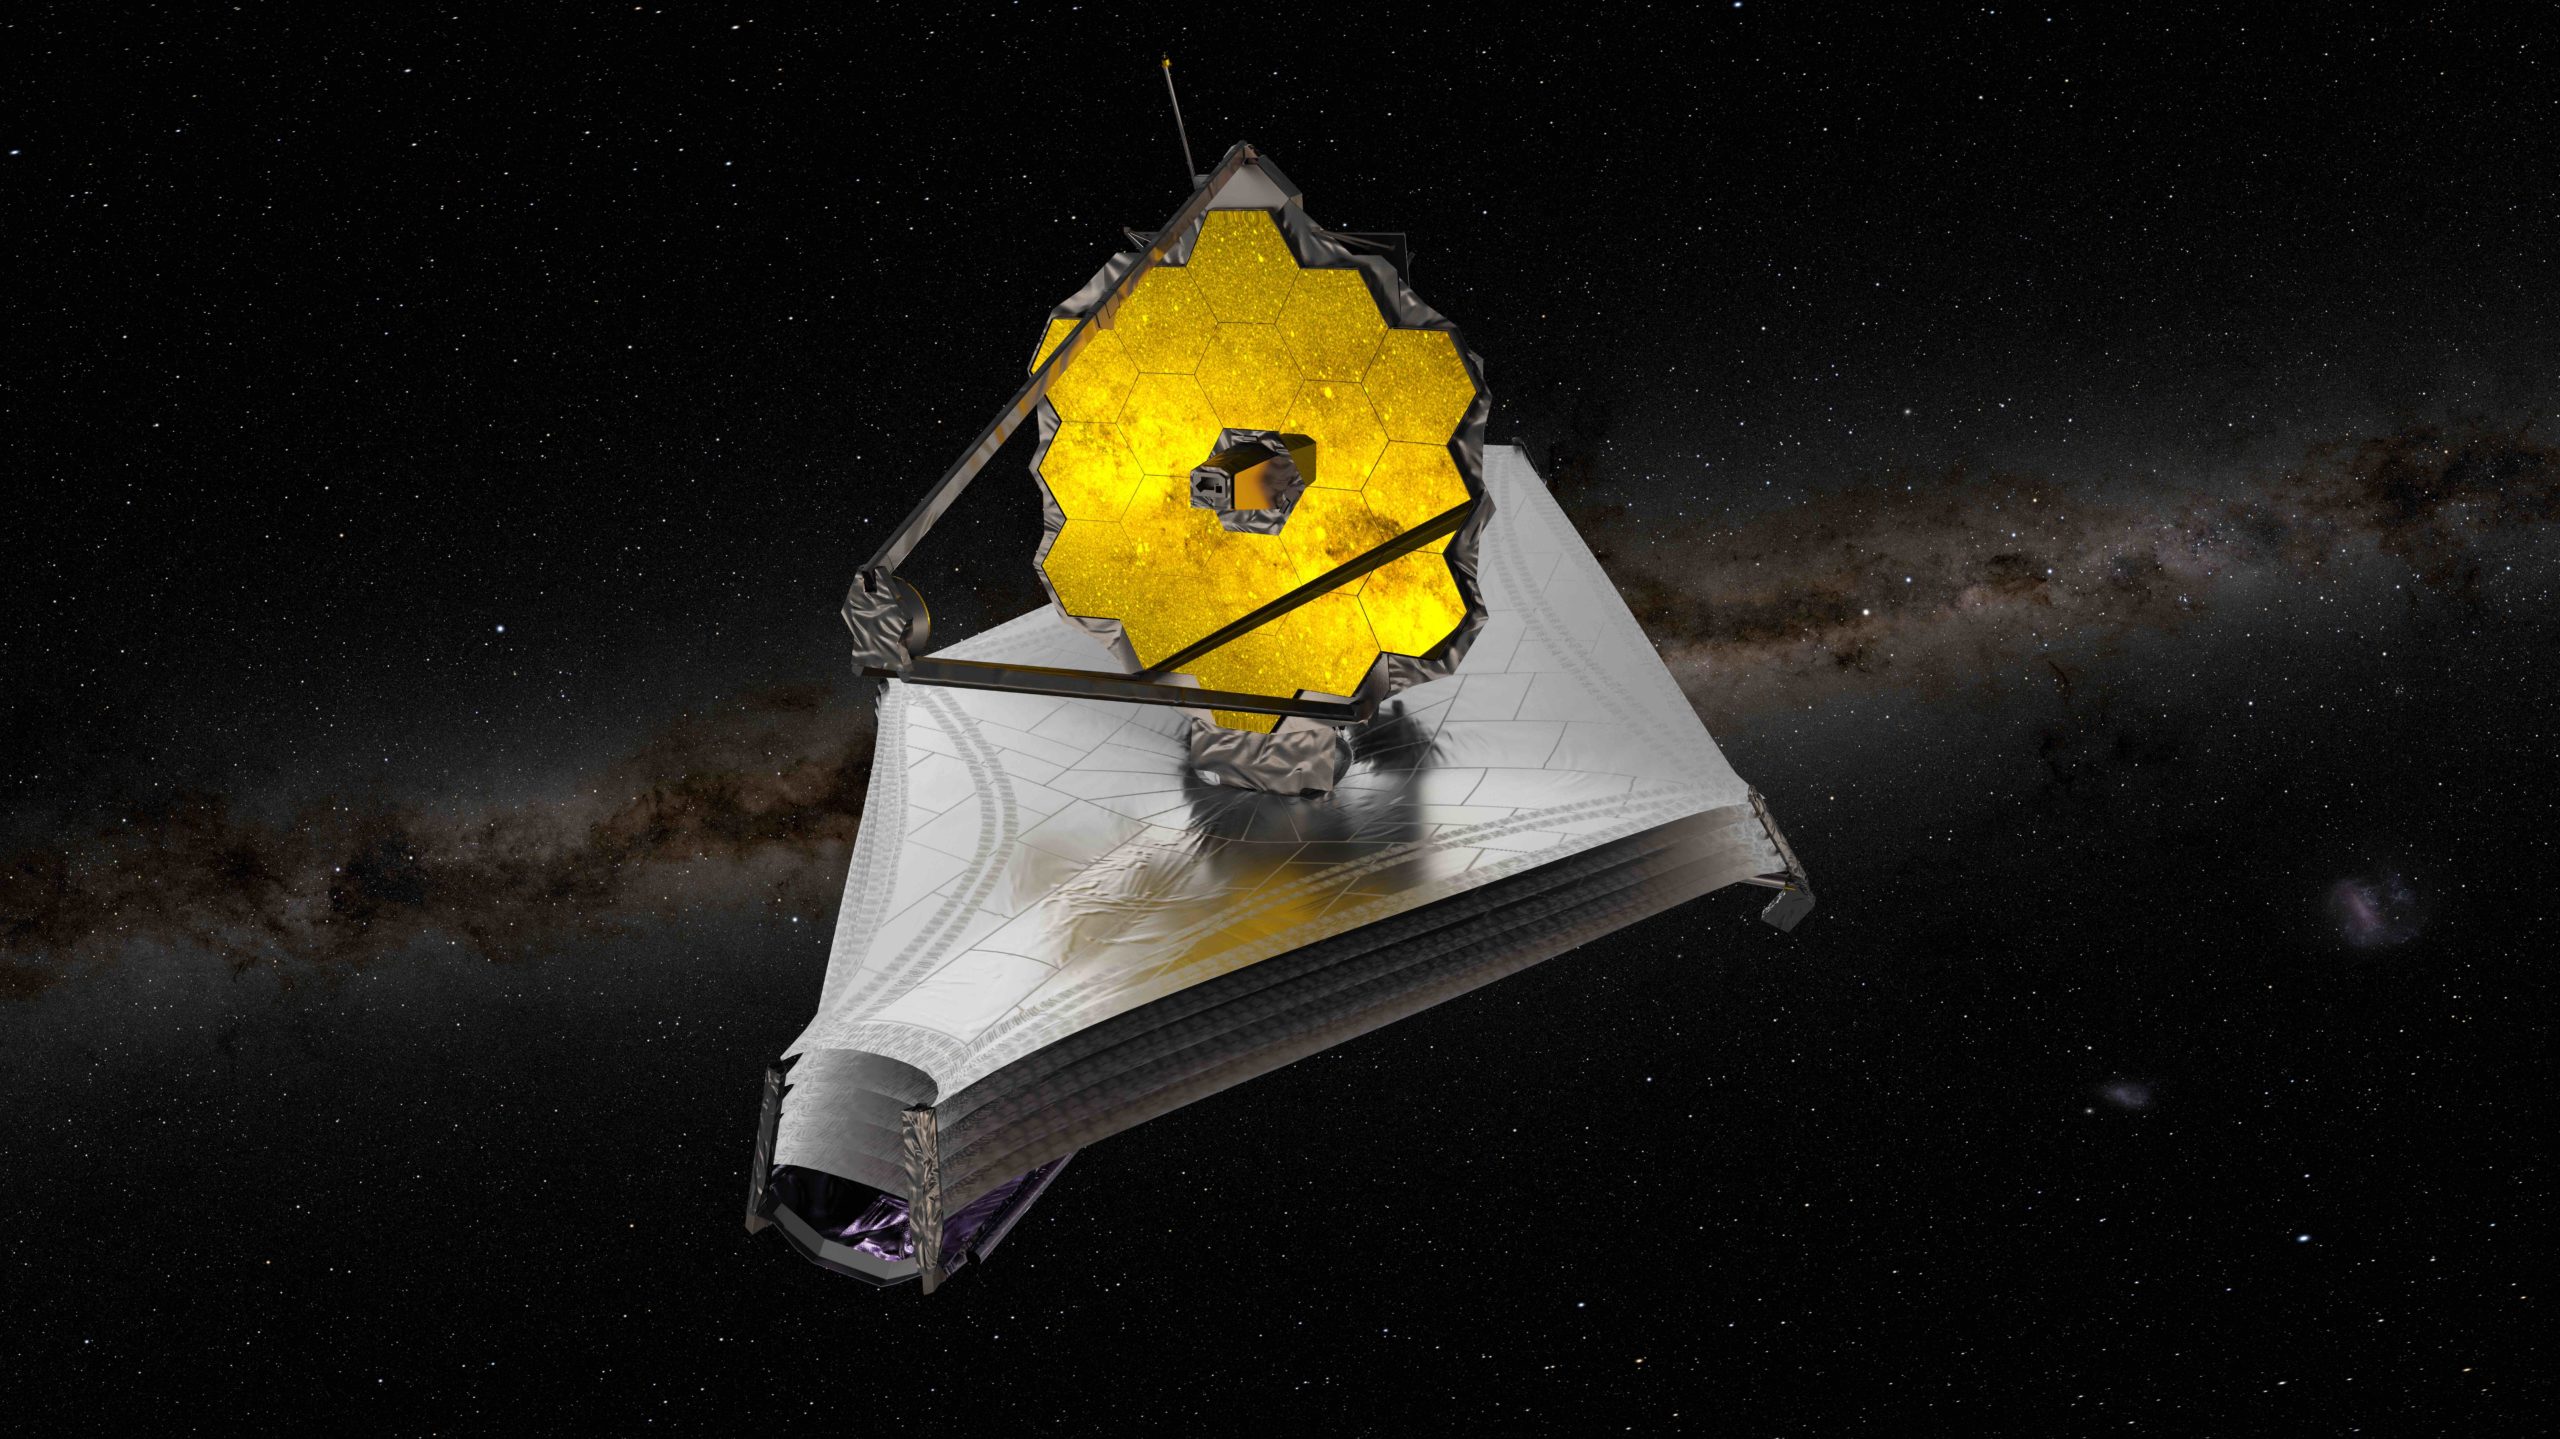 Webb Telescope Arrives at Final Orbit Destination at L2 and Starts Primary Mirror Alignment